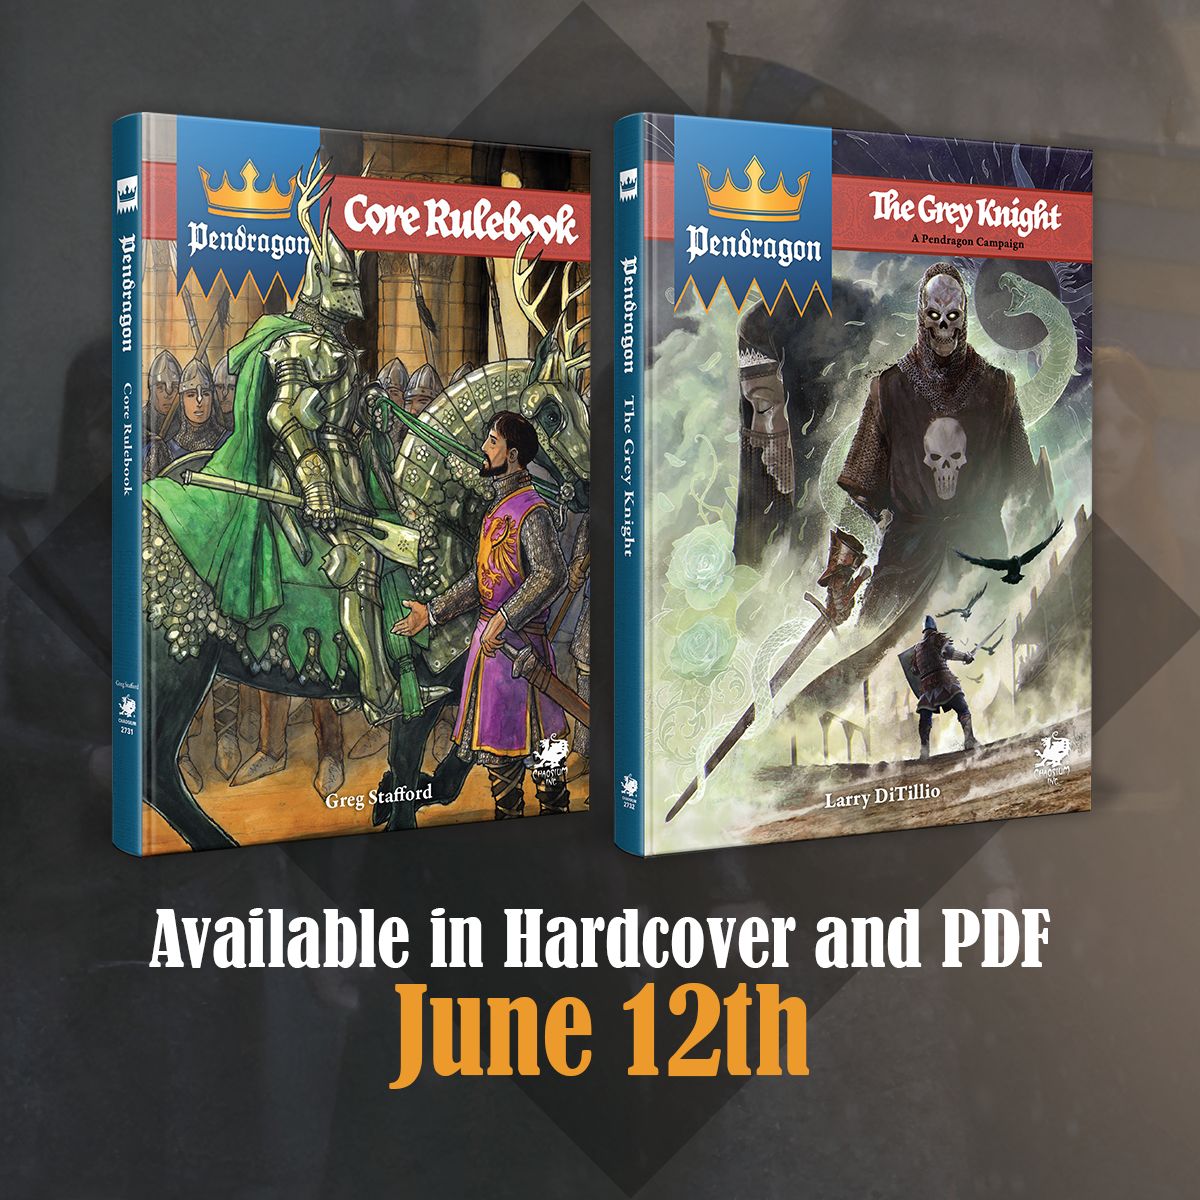 [Chaosium] The Pendragon: Core Rulebook and Pendragon: The Grey Knight are coming on June 12th!